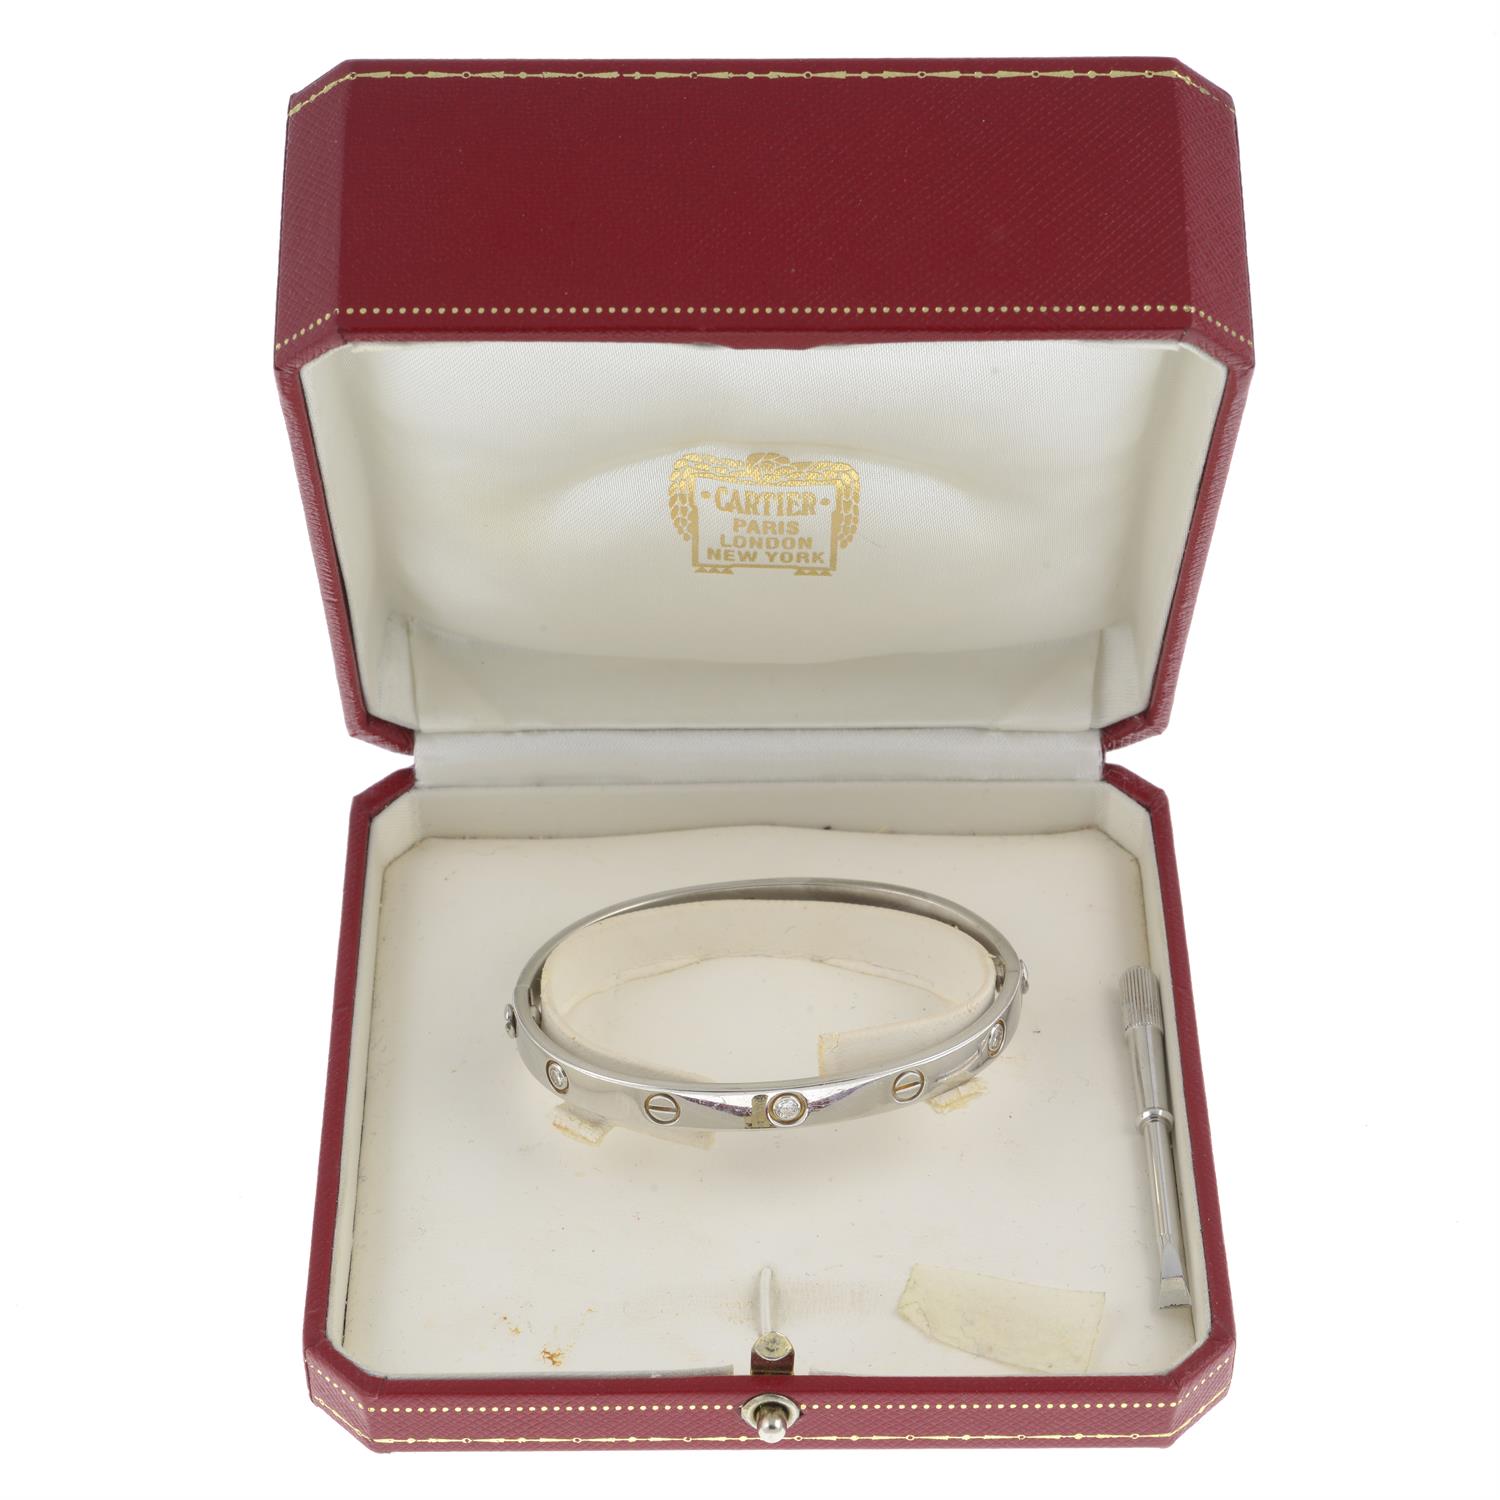 18ct gold diamond 'Love' bangle, by Cartier - Image 5 of 6